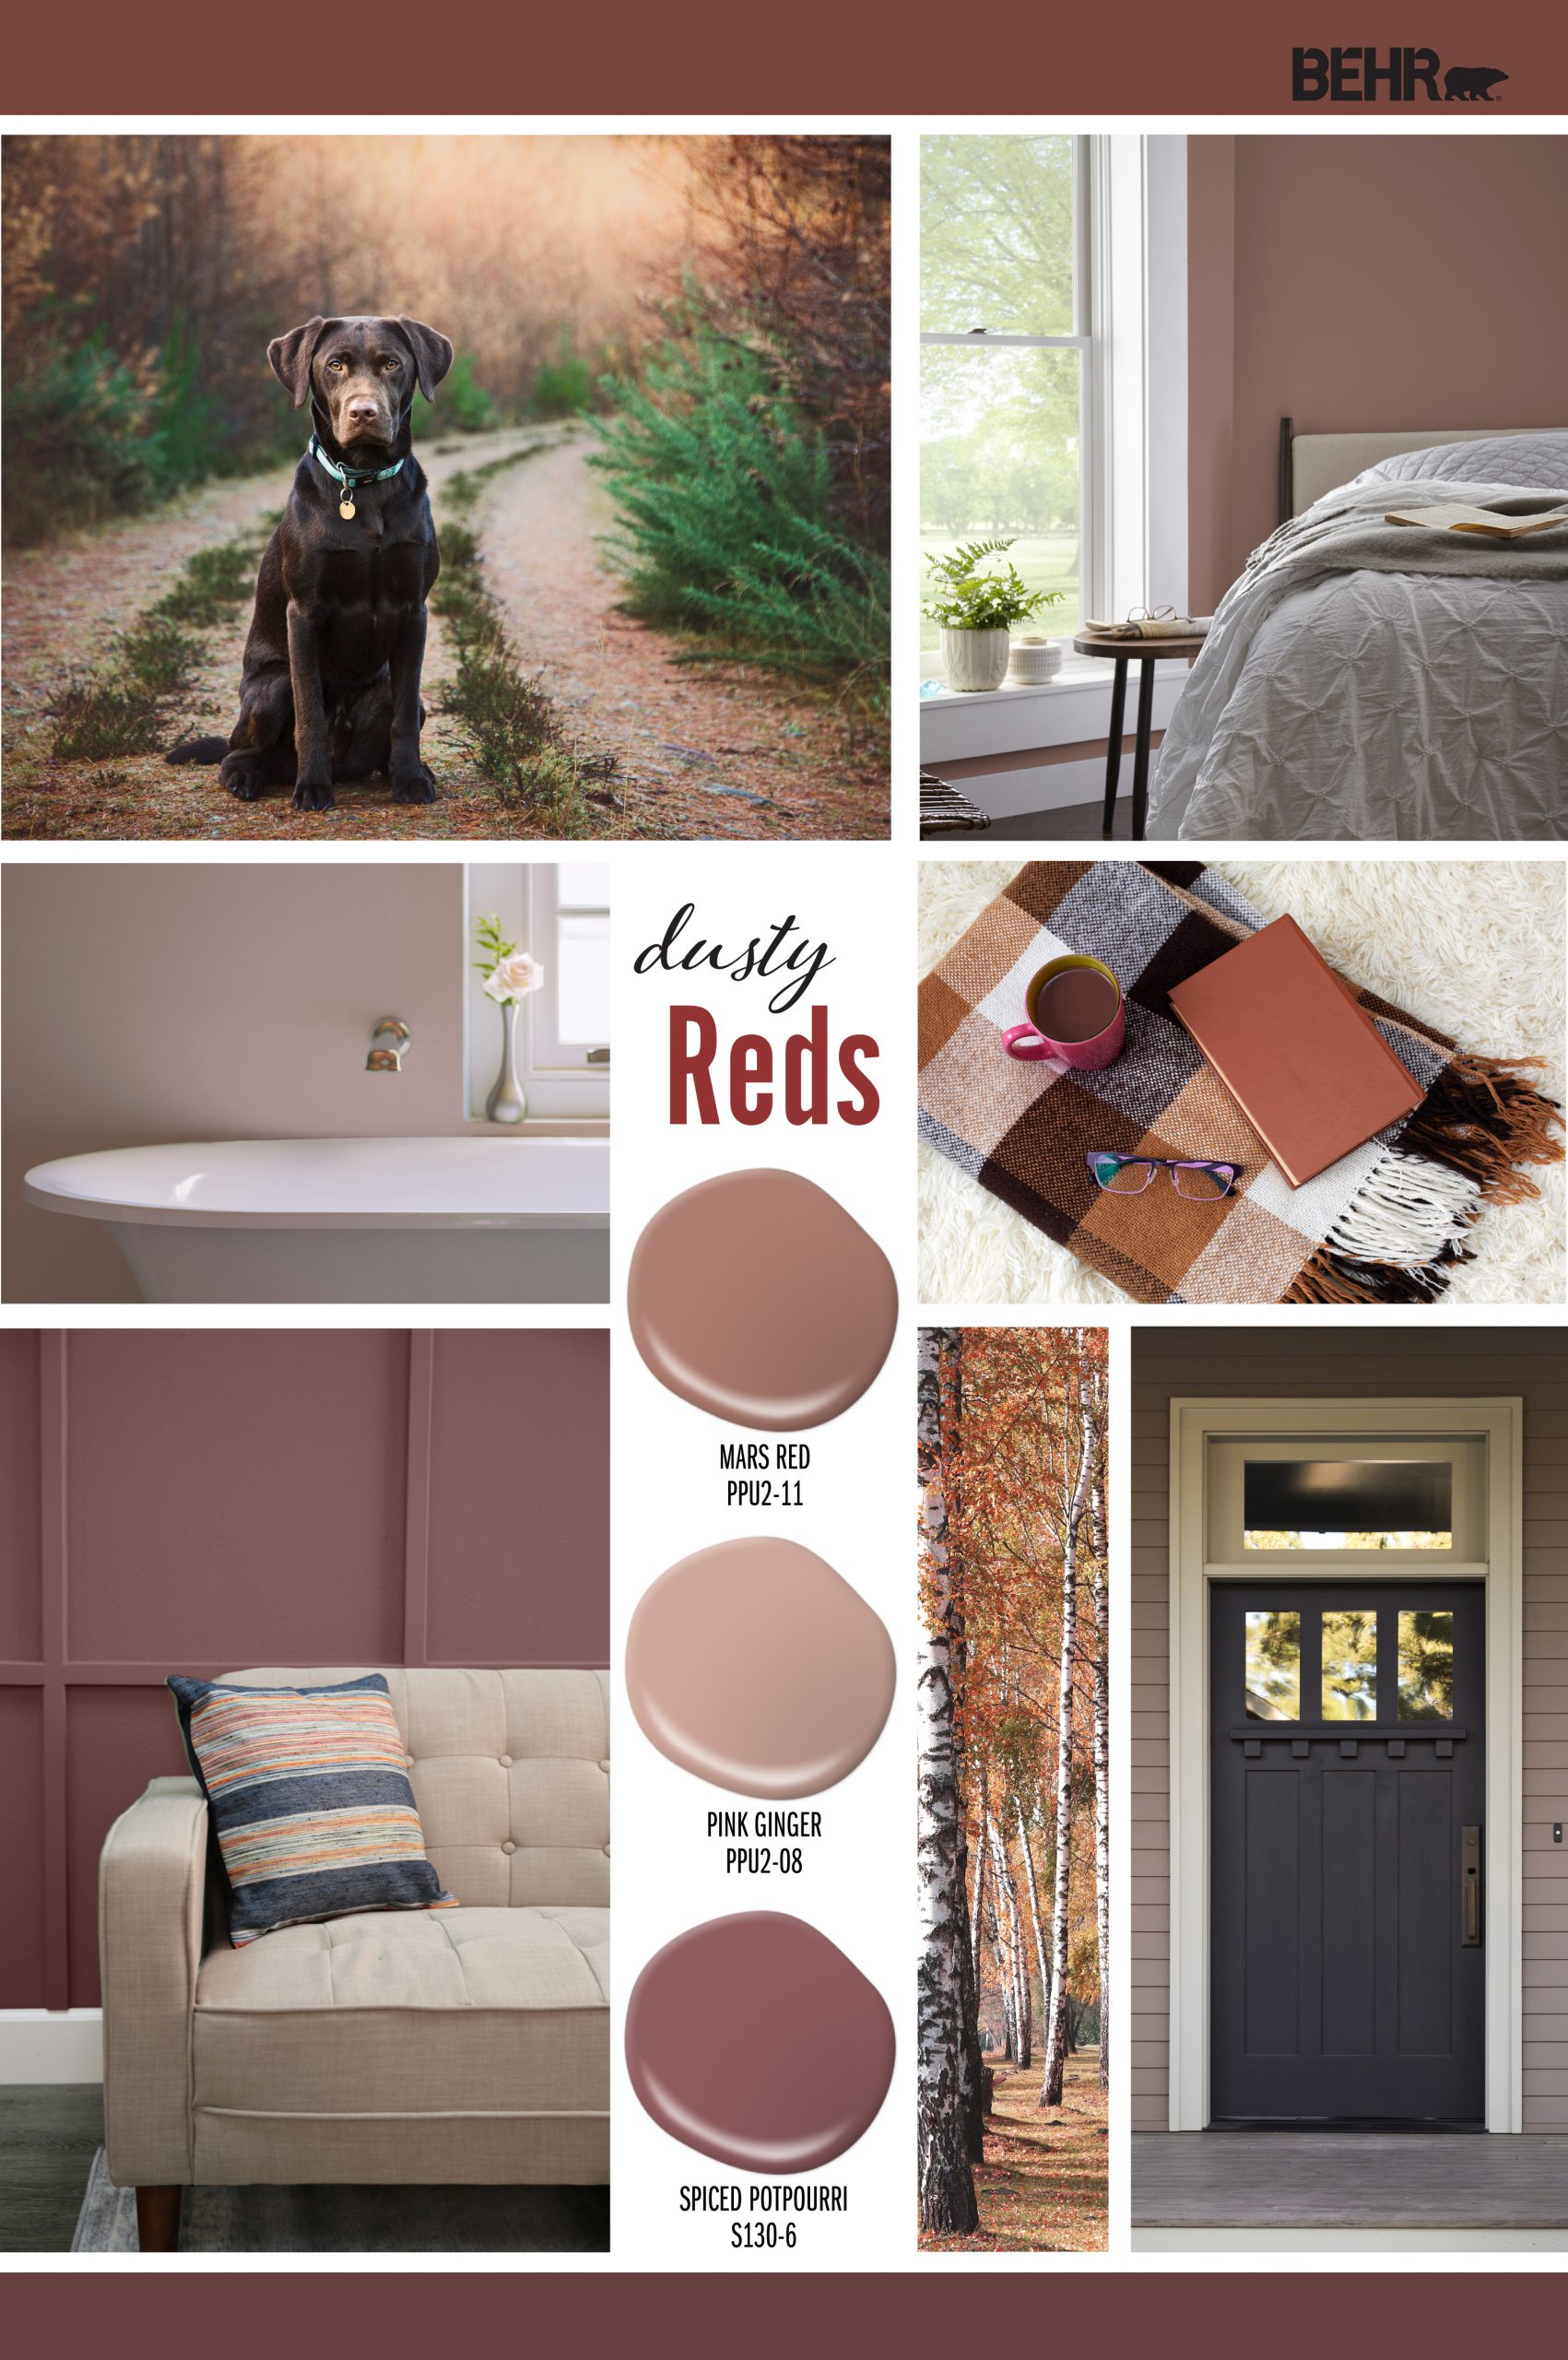 Inspiration board featuring three muted red paint drops: Mars Red, Pink Ginger, Spiced Potpourri Images shown are the following: -A dog standing in the middle of a dirt path with fall foliage behind him. -A bedroom with wall painted in Mars Red. -A bathroom with wall painted in Pink Ginger. -A living room with walls painted in Spiced Potpourri. -An exterior front entry with wall painted in Pink Ginger.